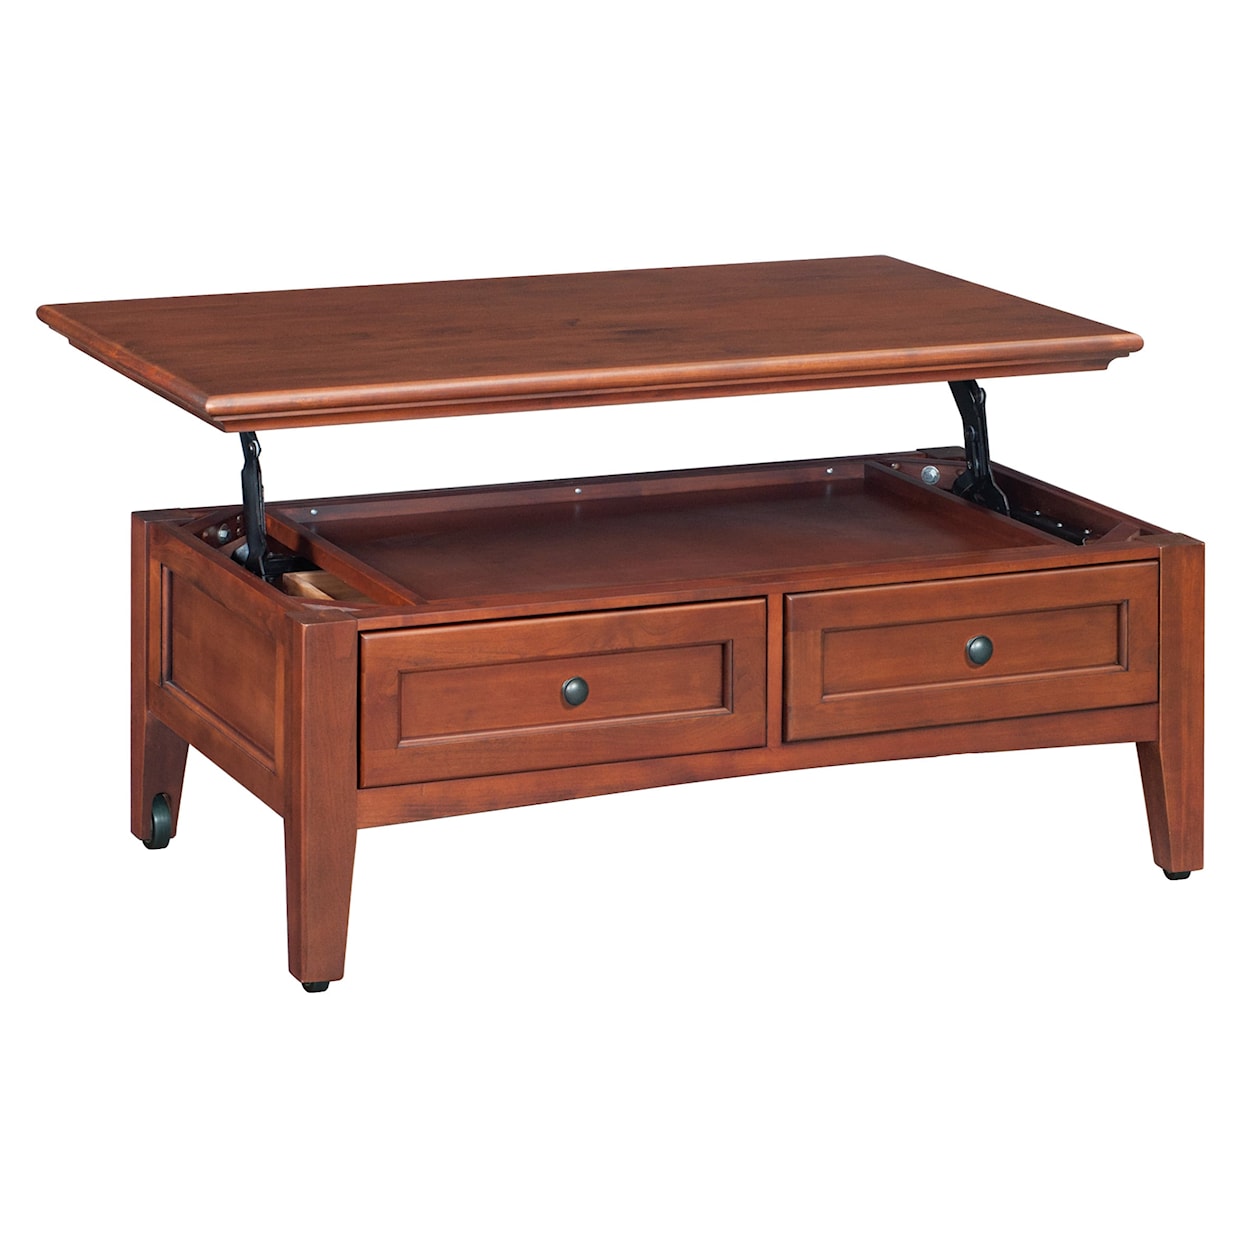 Whittier Wood McKenzie Cafe  Lift Top Coffee Table